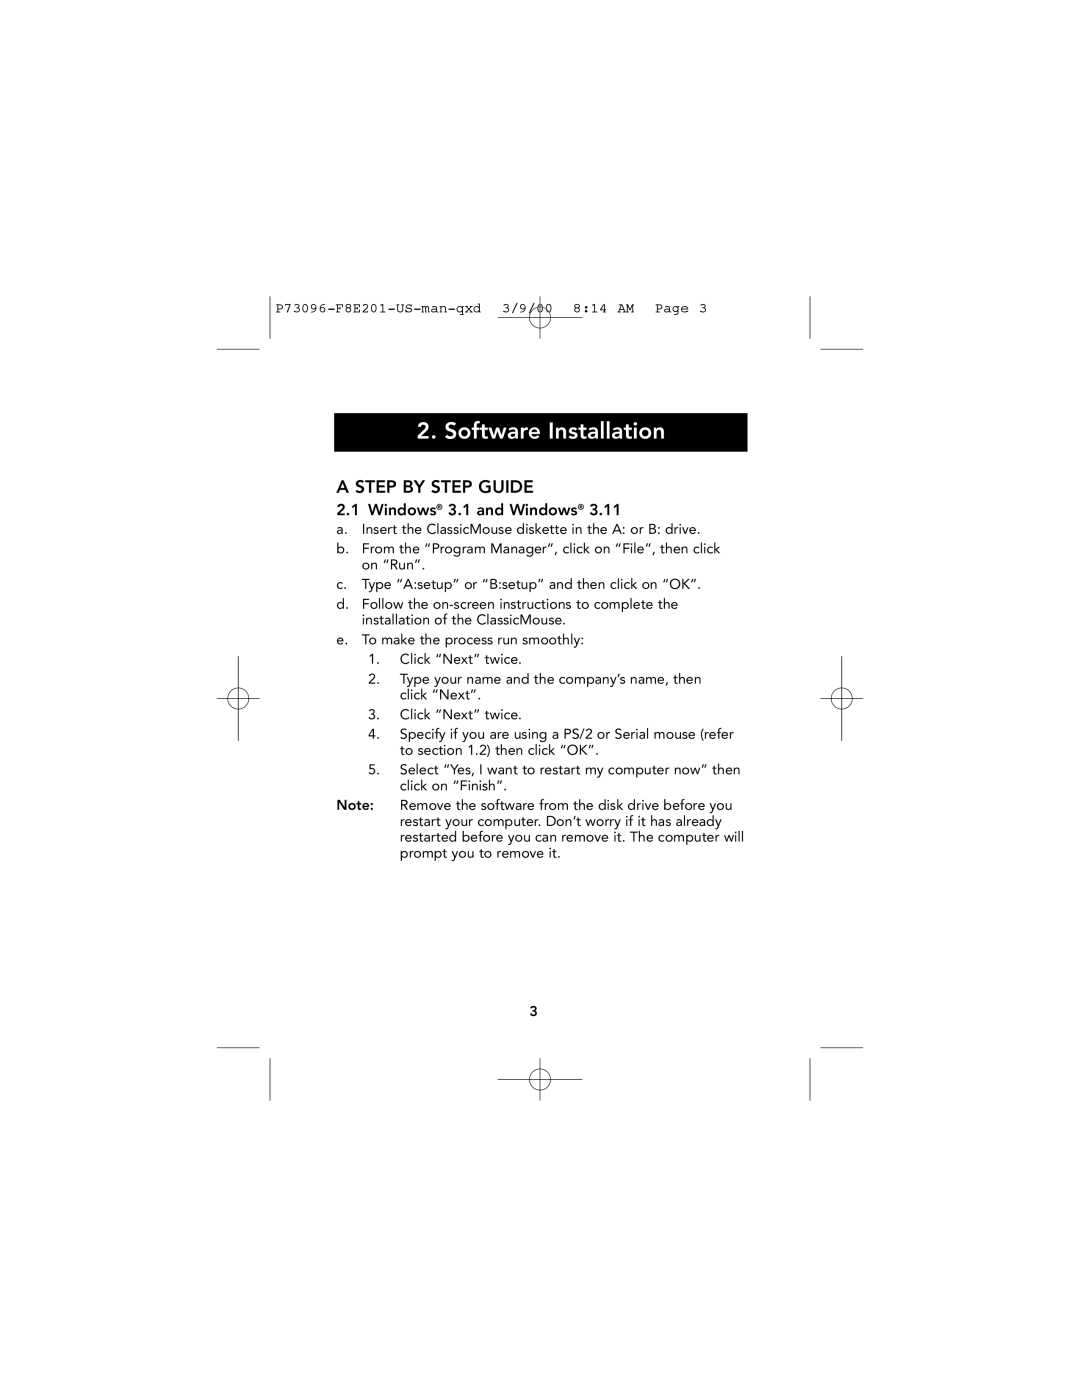 Belkin P73096, F8E201-BLK user manual Software Installation, A Step By Step Guide, Windows 3.1 and Windows 